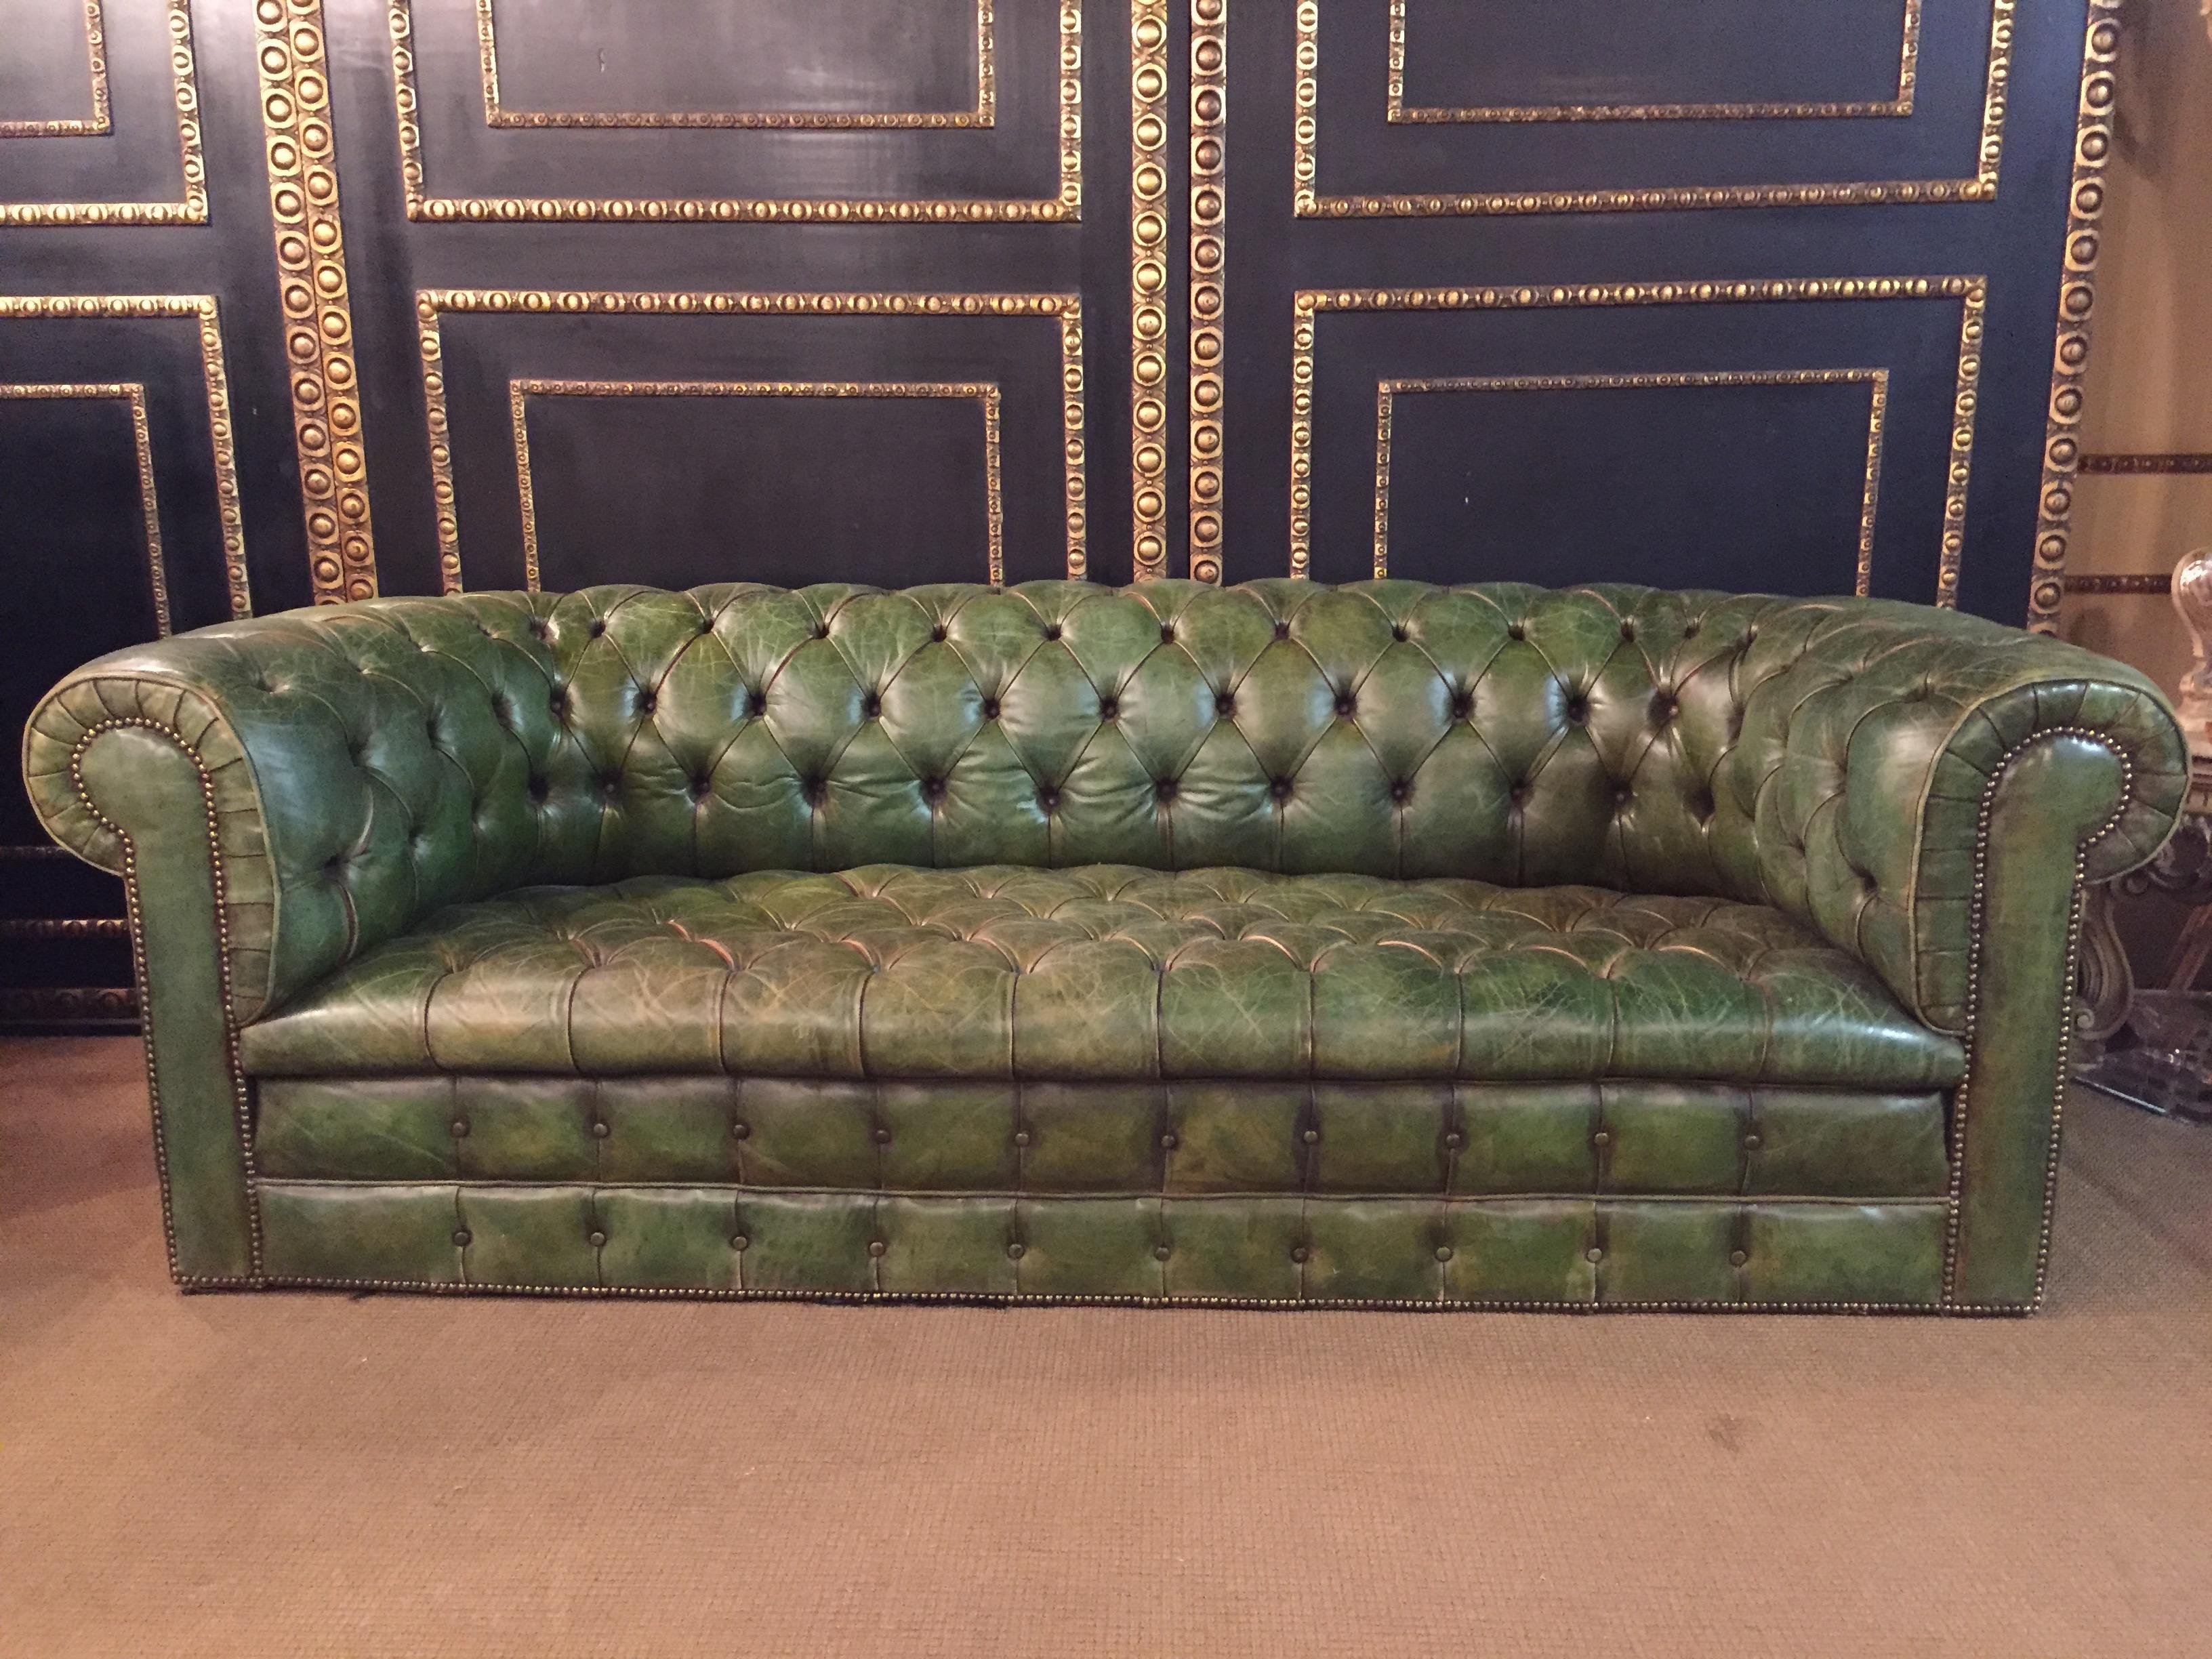 Original old chesterfield sofa, quilted seat and back strong leather. This unique sofa was bought in an antique shop in 1978, real leather with original invoice. Color is faded green, the inside is filled with horsehair, seats are with Classic laced